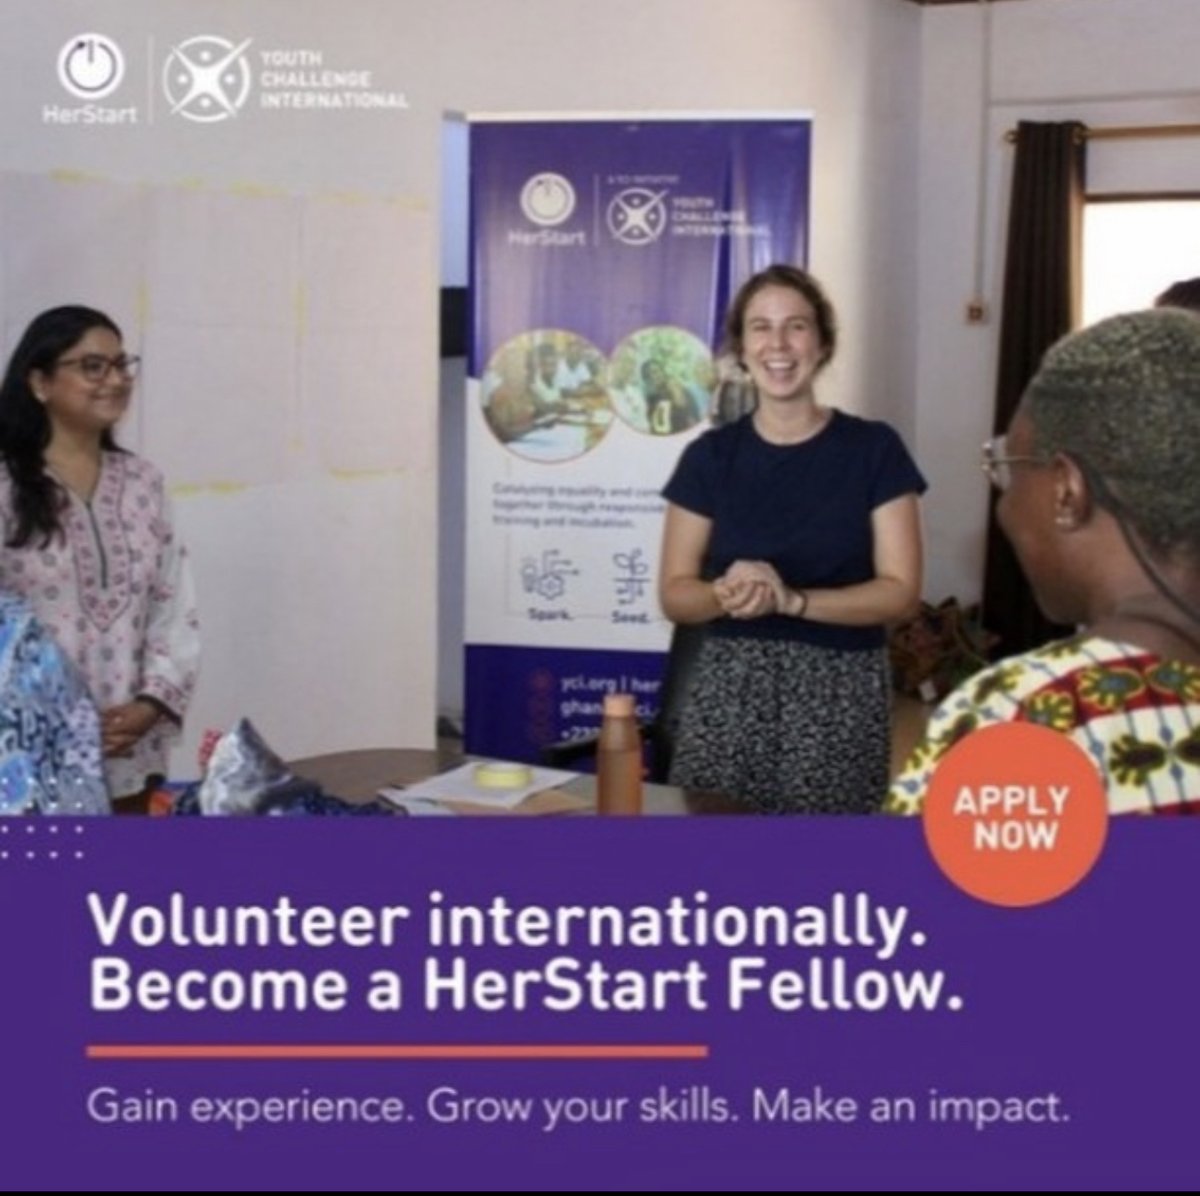 🌟 Unlock Your Potential with Youth Challenge International's #HerStart Fellowship!

Apply now for January or May: bit.ly/3PNukOC 

#HerStartFellowship #GlobalImpact #YCI #OurFuture #InnovateTheFuture #volunteer #internationalvolunteer #volunteerabroad #Act4SDGs